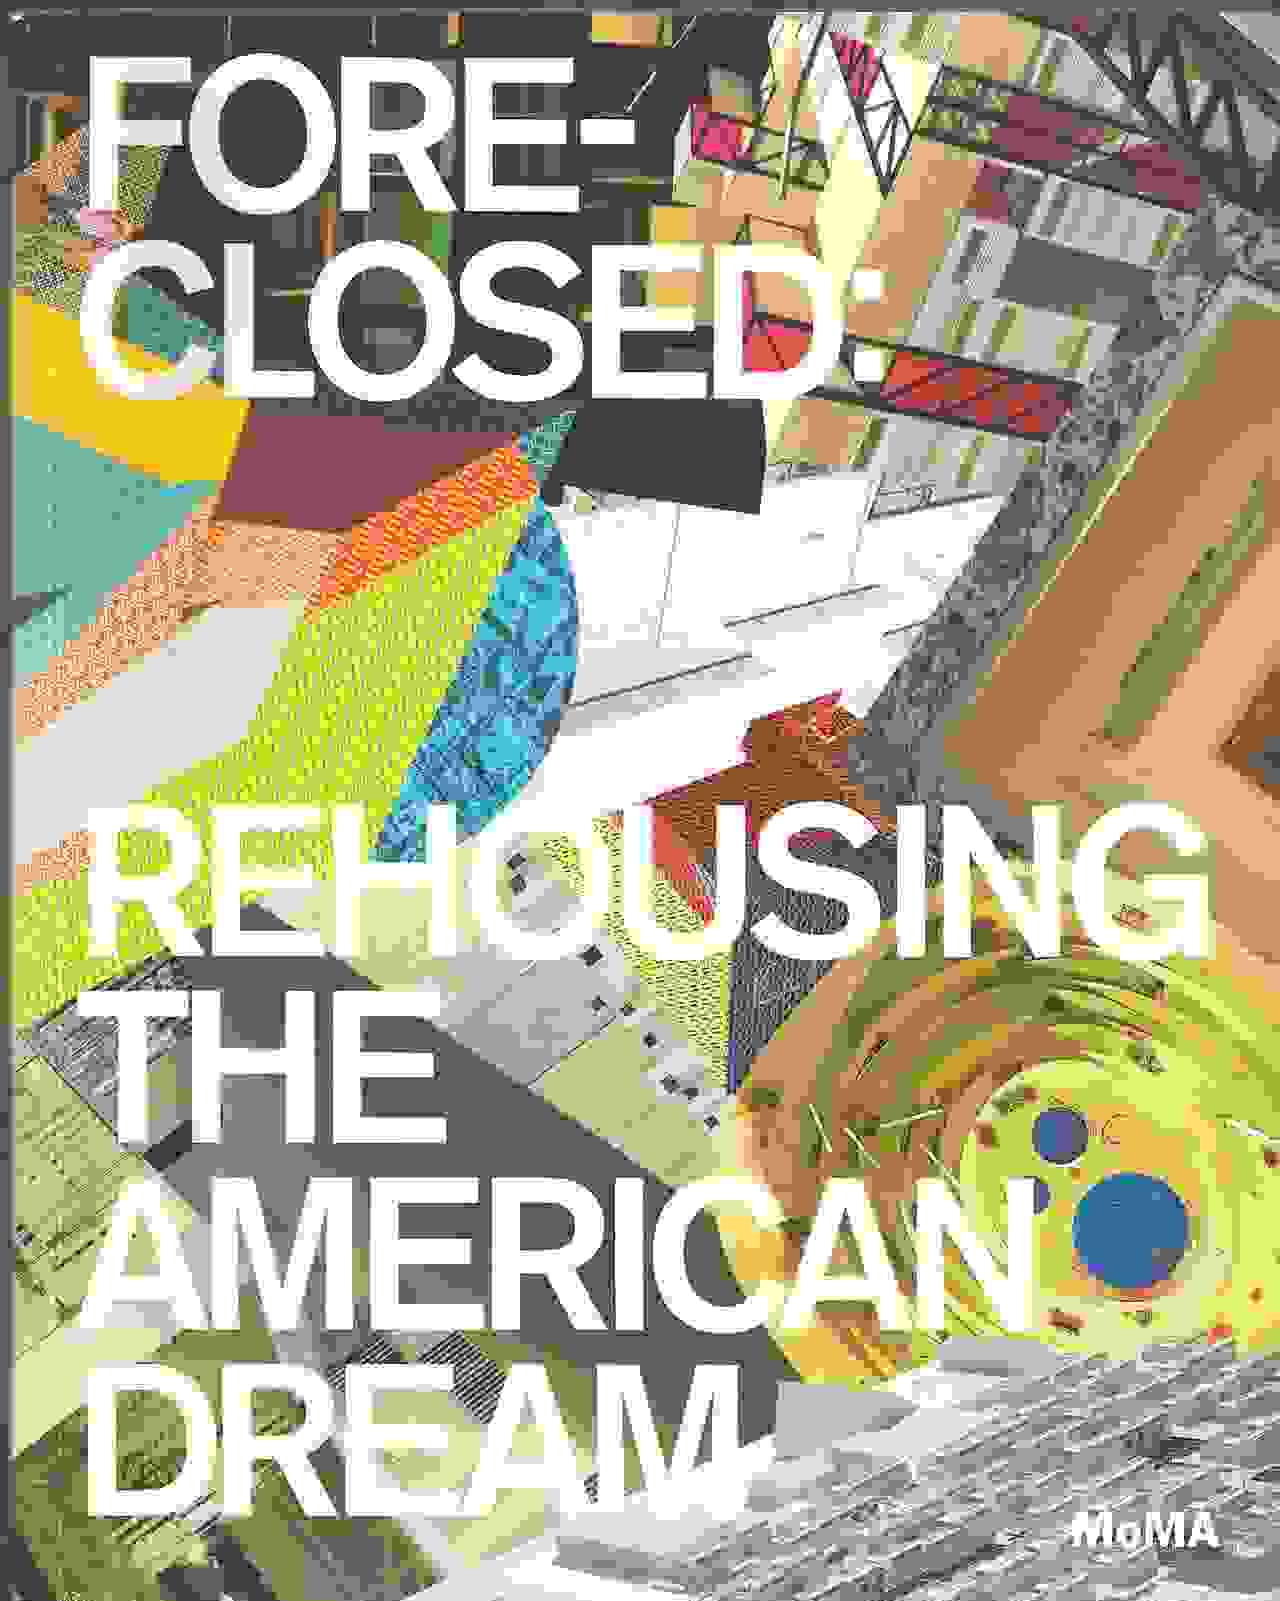 Foreclosed: Rehousing The American Dream